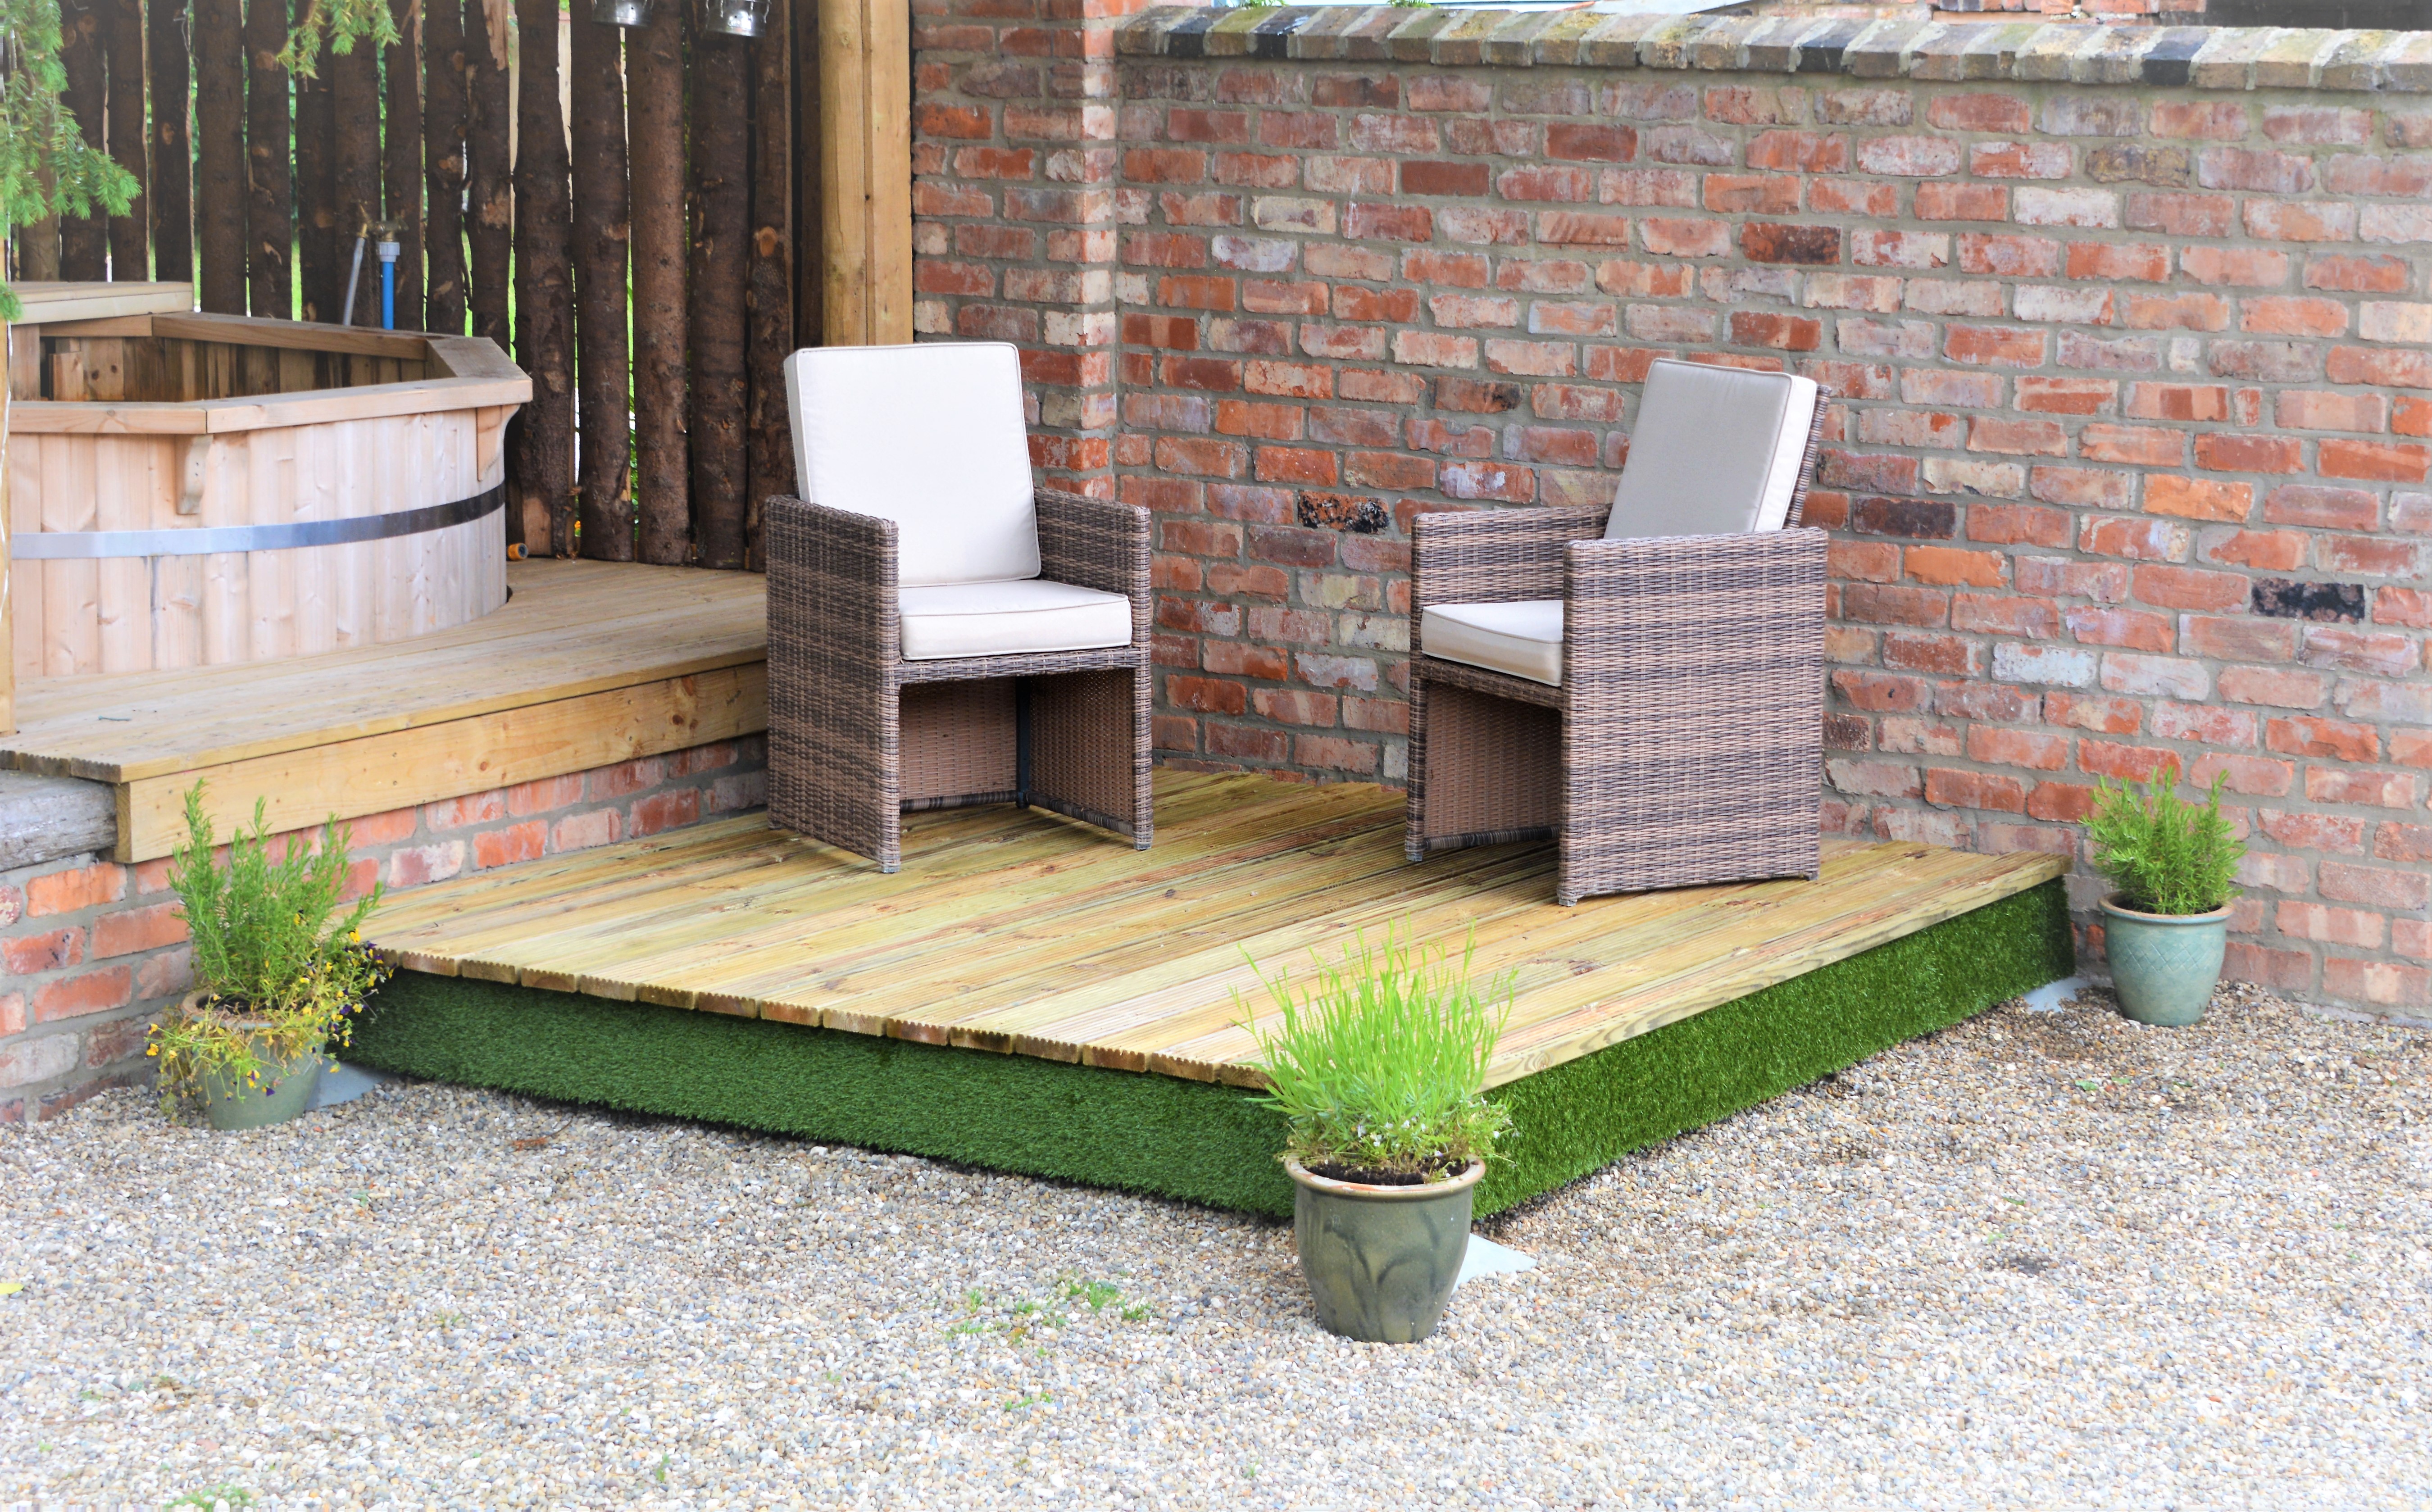 Swift Deck Self-Assembly Garden Decking Kit With Adjustable Foundations - 2.4 x 2.4m